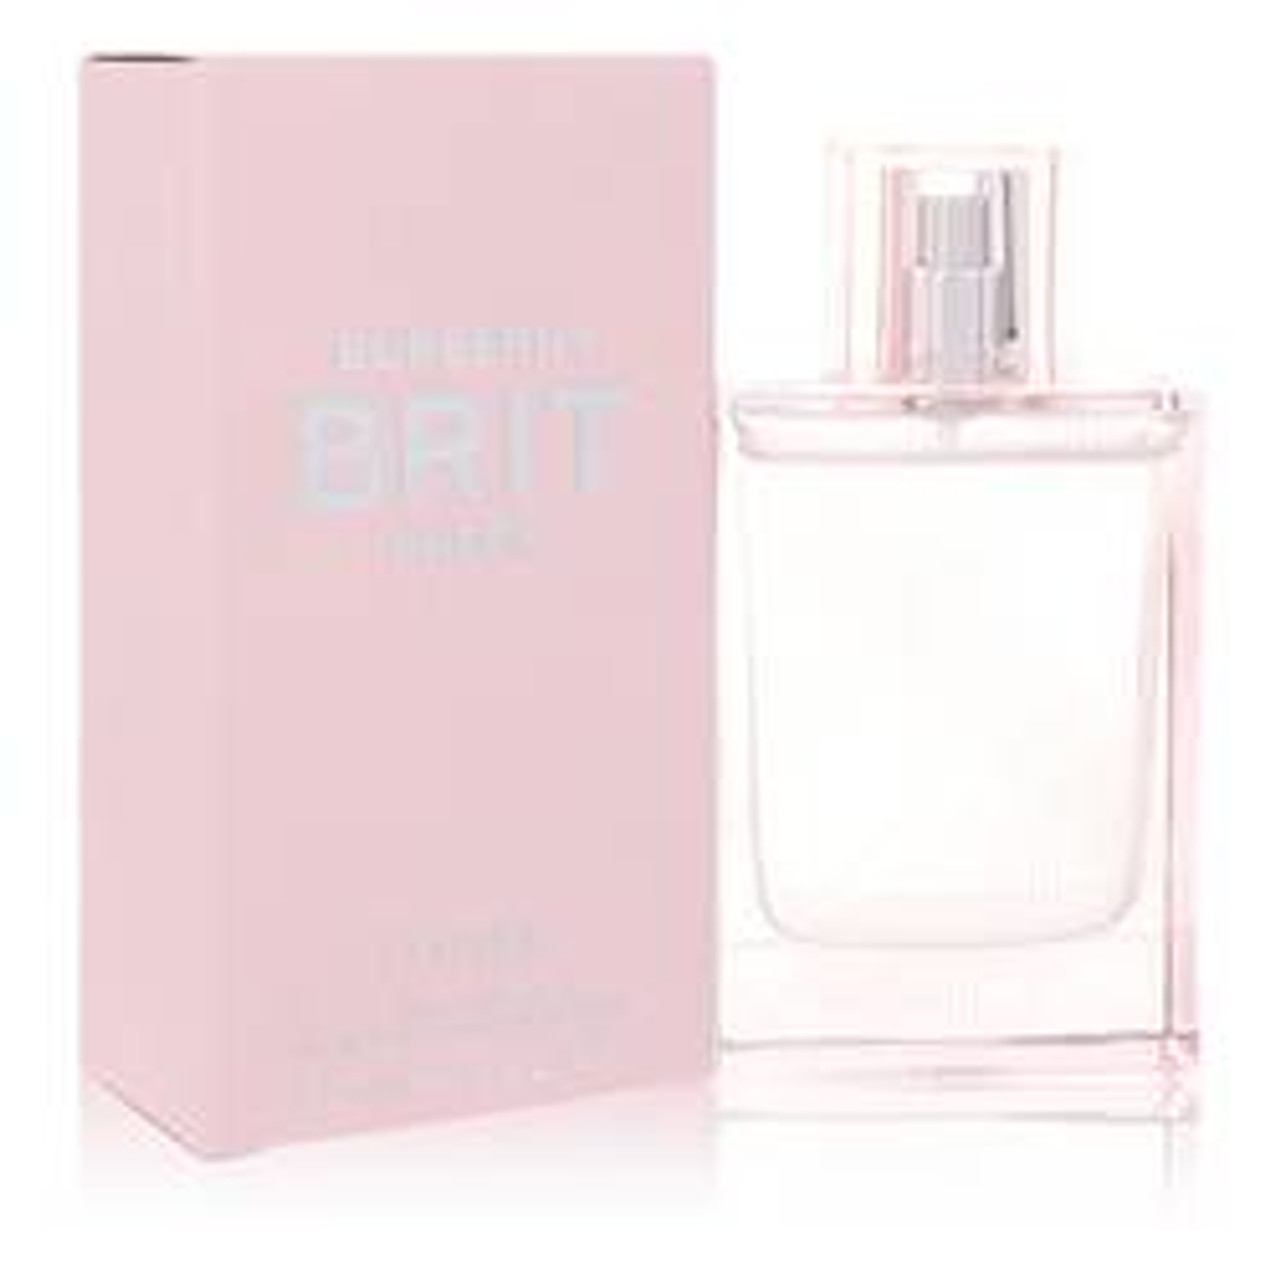 Burberry Brit Sheer Perfume By Burberry Eau De Toilette Spray 1.7 oz for Women - [From 96.00 - Choose pk Qty ] - *Ships from Miami